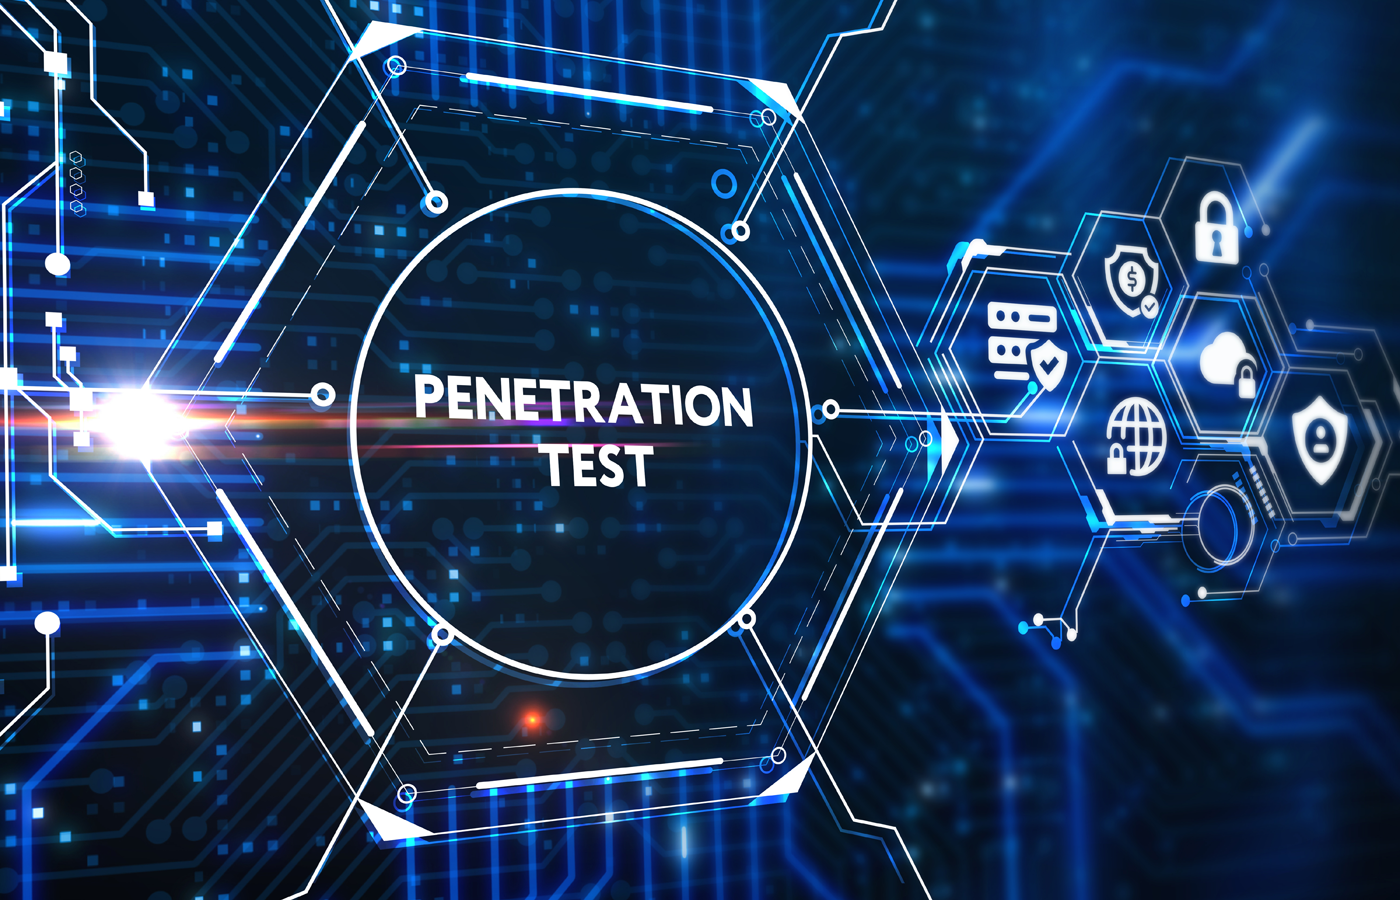 Penetration Test label with technology related icons on a technological background.